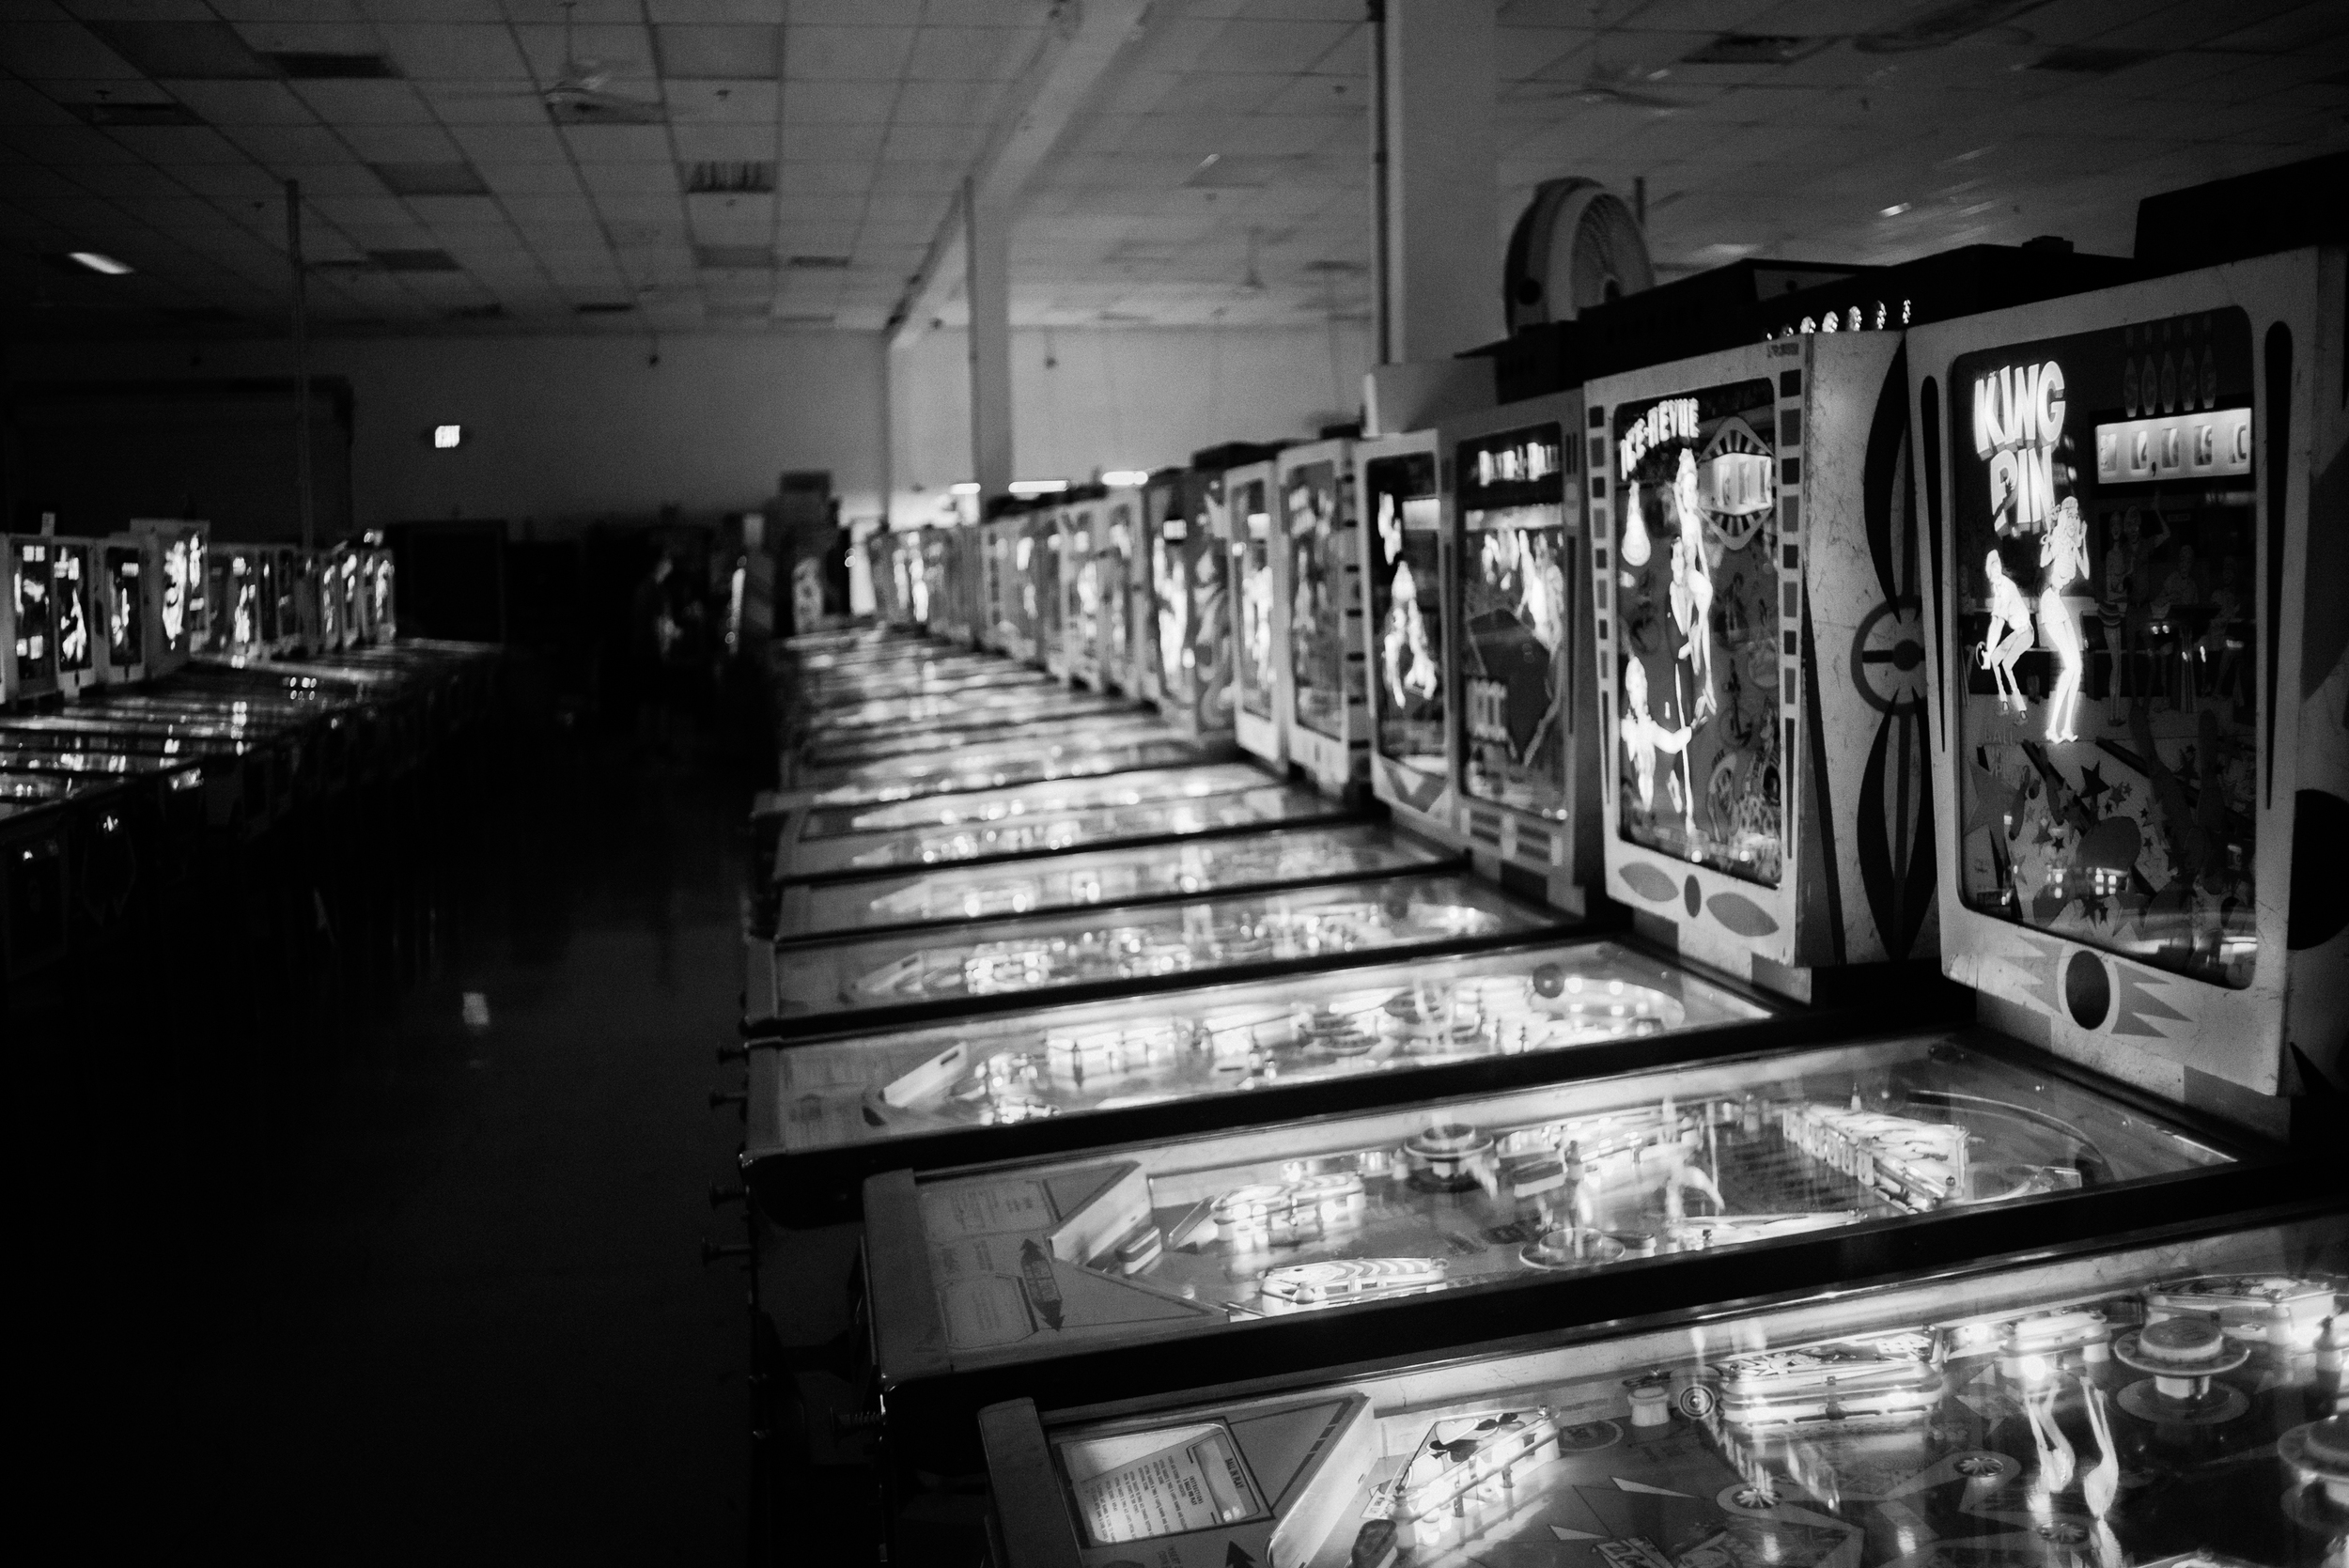 Pinball Hall of Fame in Las Vegas - Tours and Activities